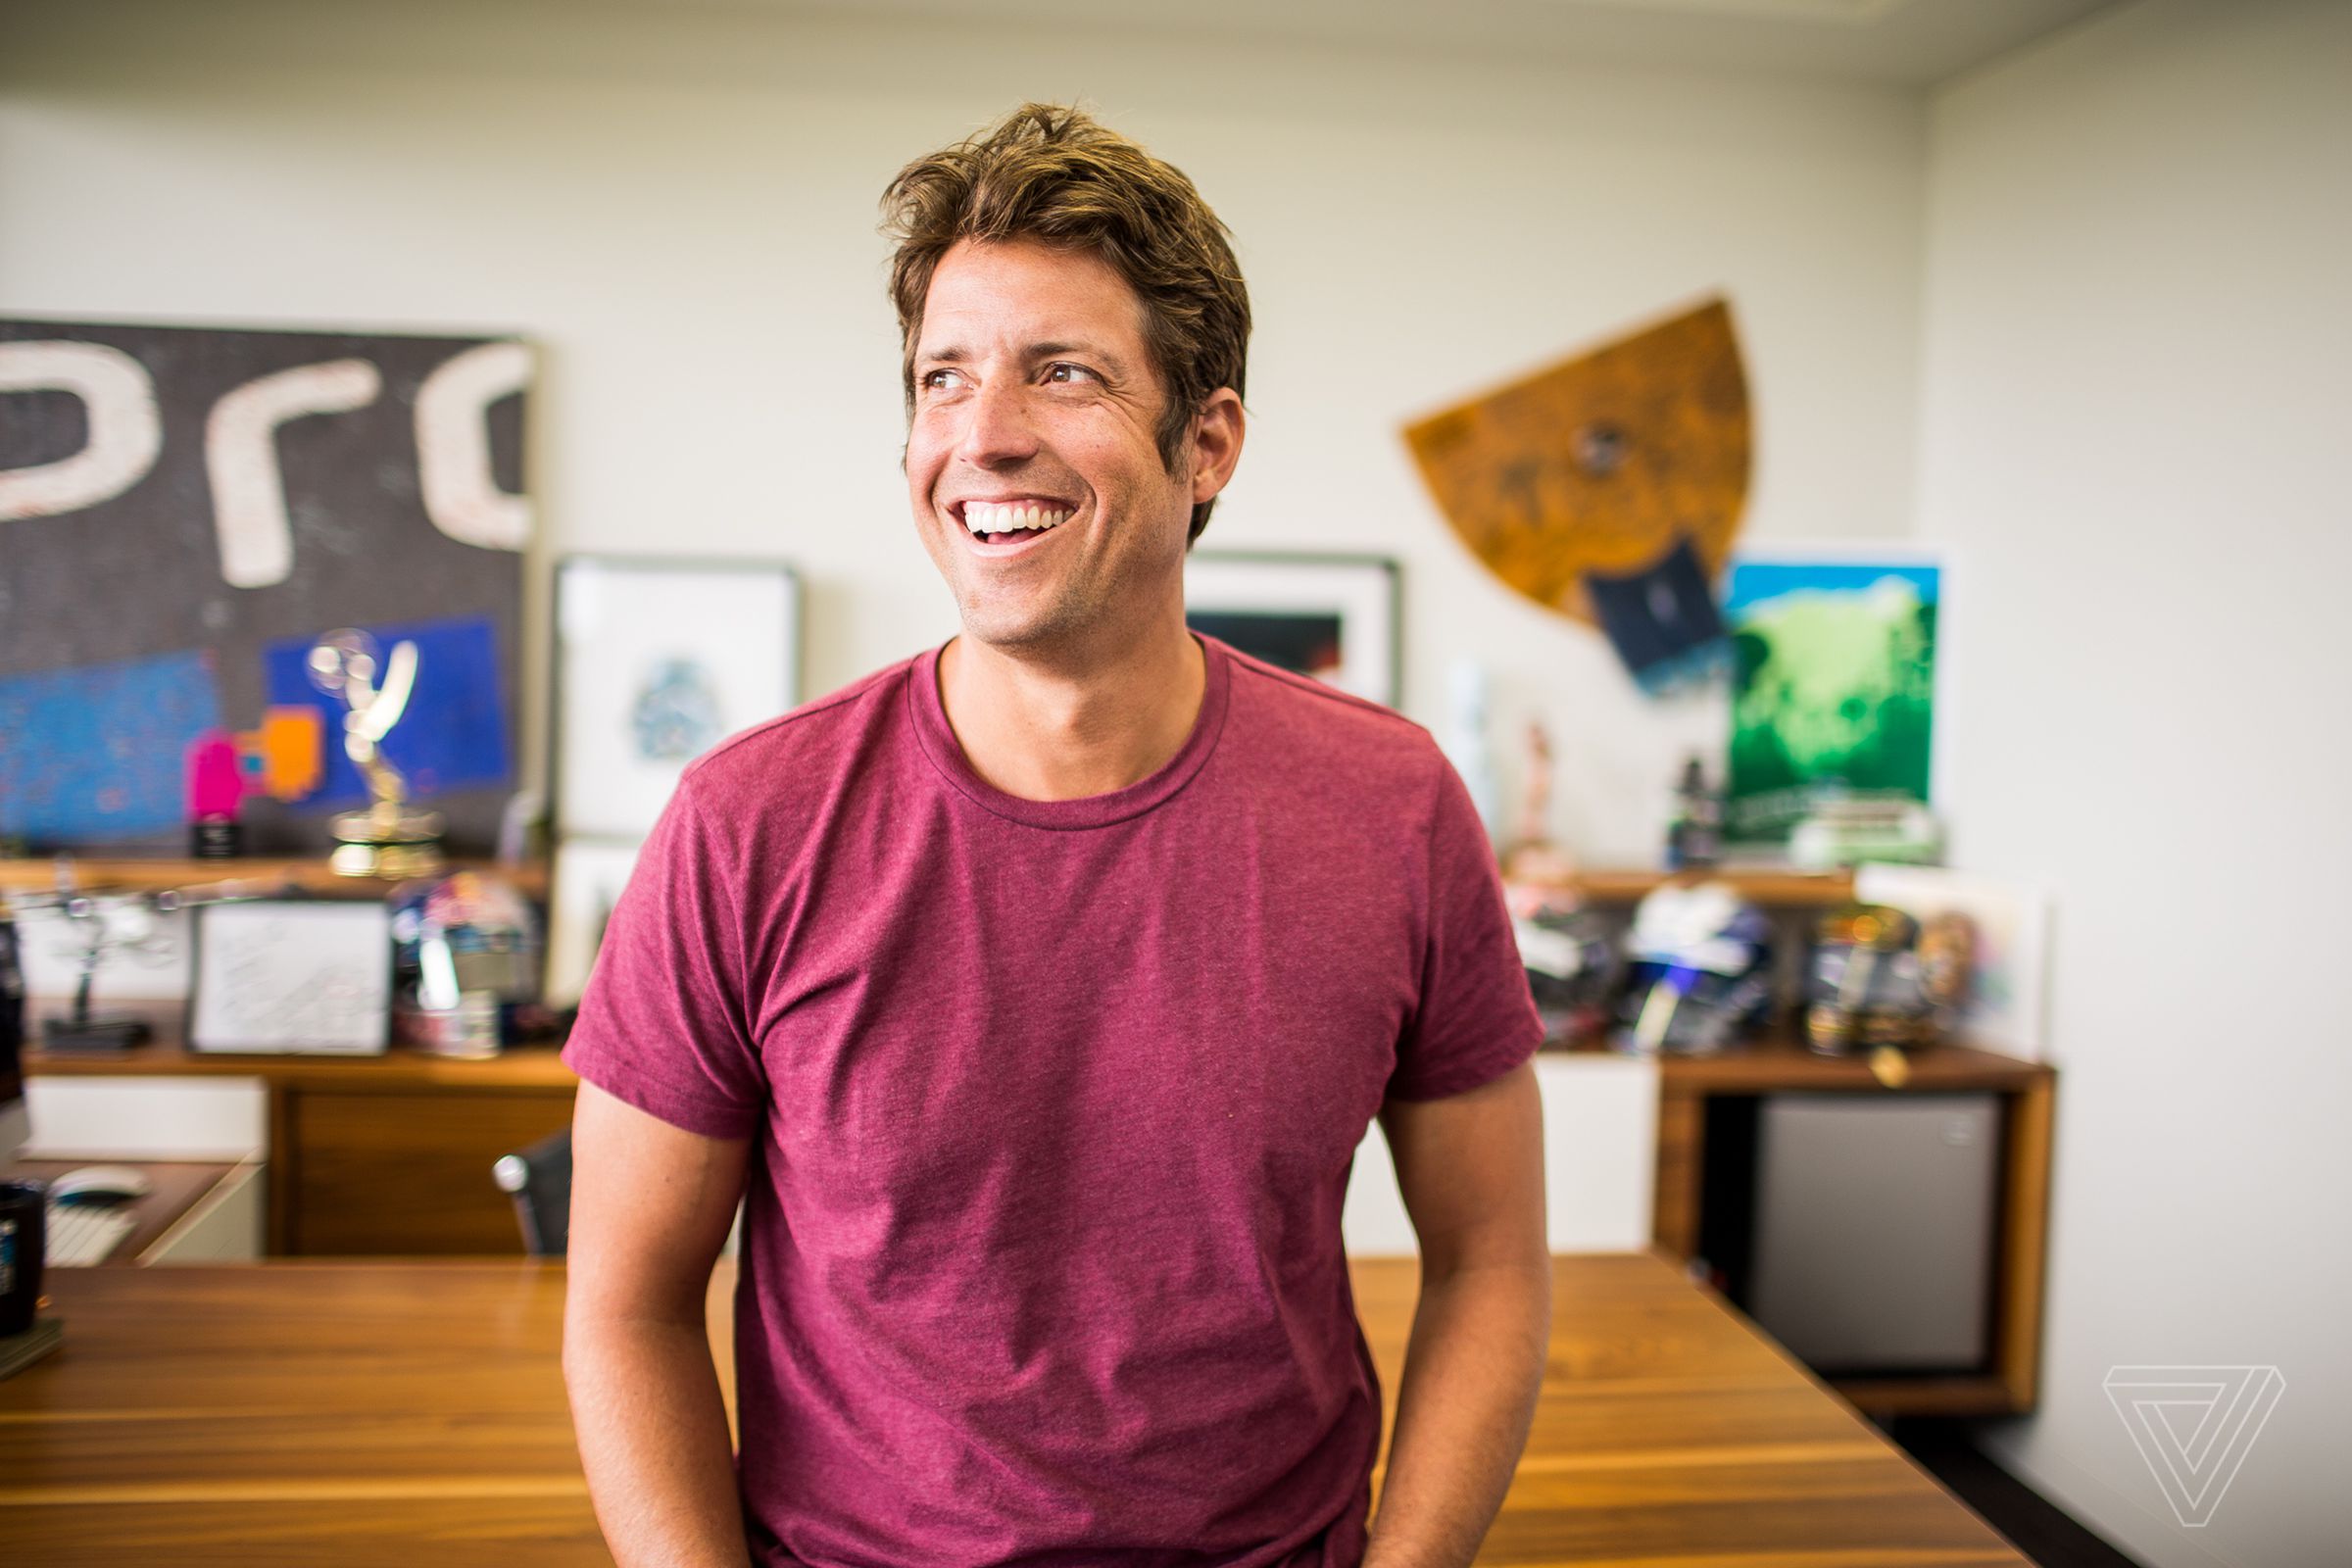 GoPro CEO Nick Woodman in his office in 2016.